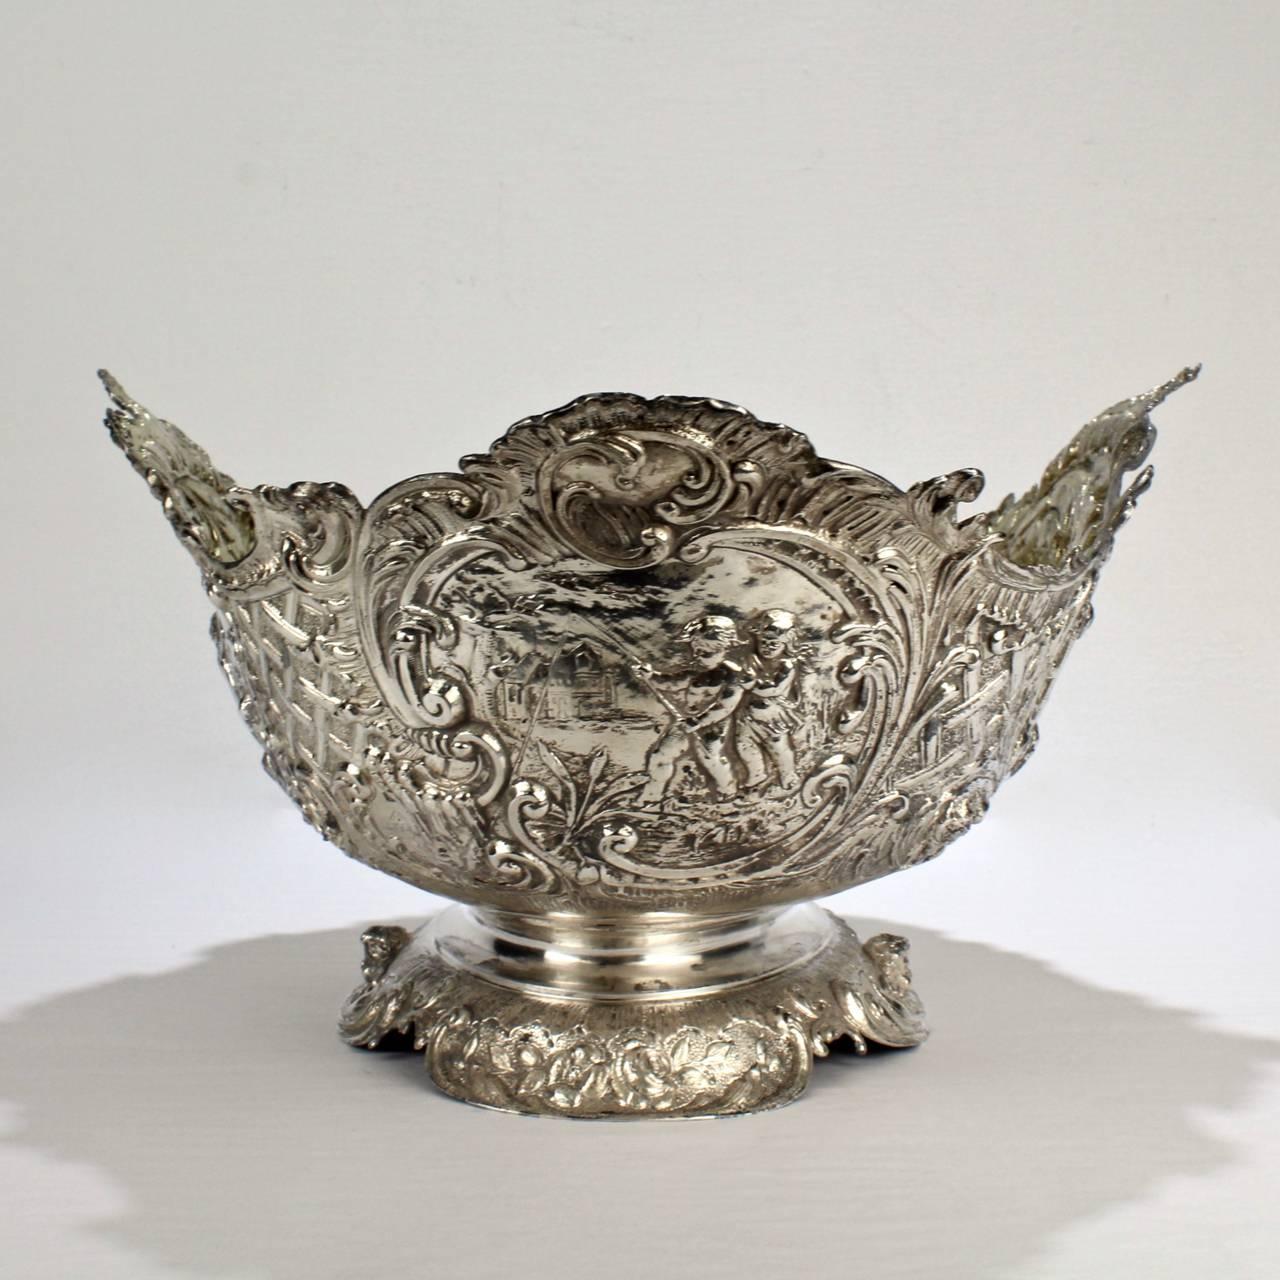 19th Century German Rococo Revival Repoussé 800 Silver Centerpiece or Bowl In Good Condition For Sale In Philadelphia, PA